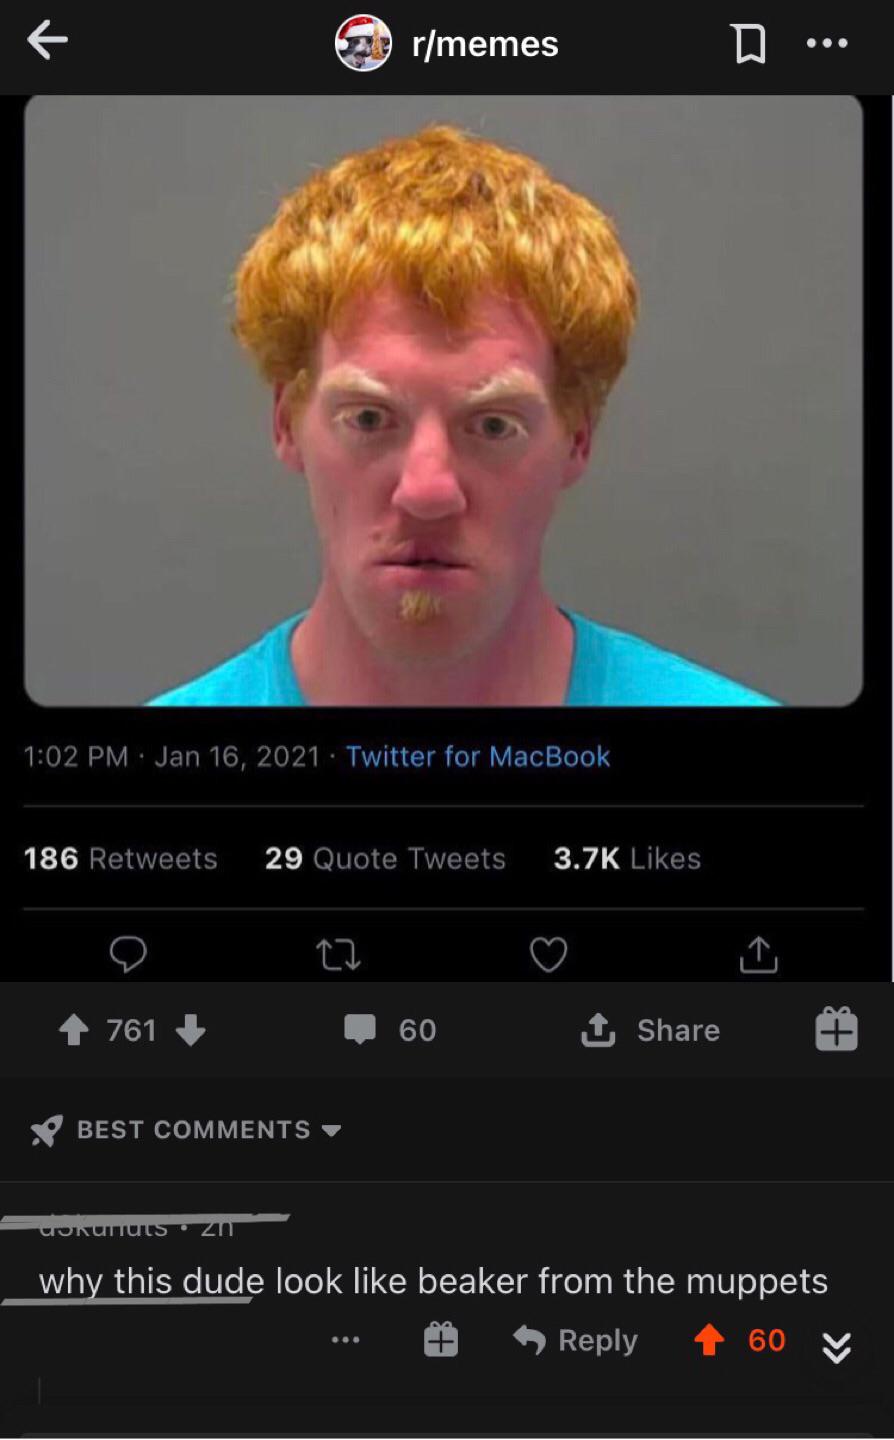 video - rmemes Twitter for MacBook 186 29 Quote Tweets 761 60 1 T T Best NuTu Zi why this dude look beaker from the muppets 60